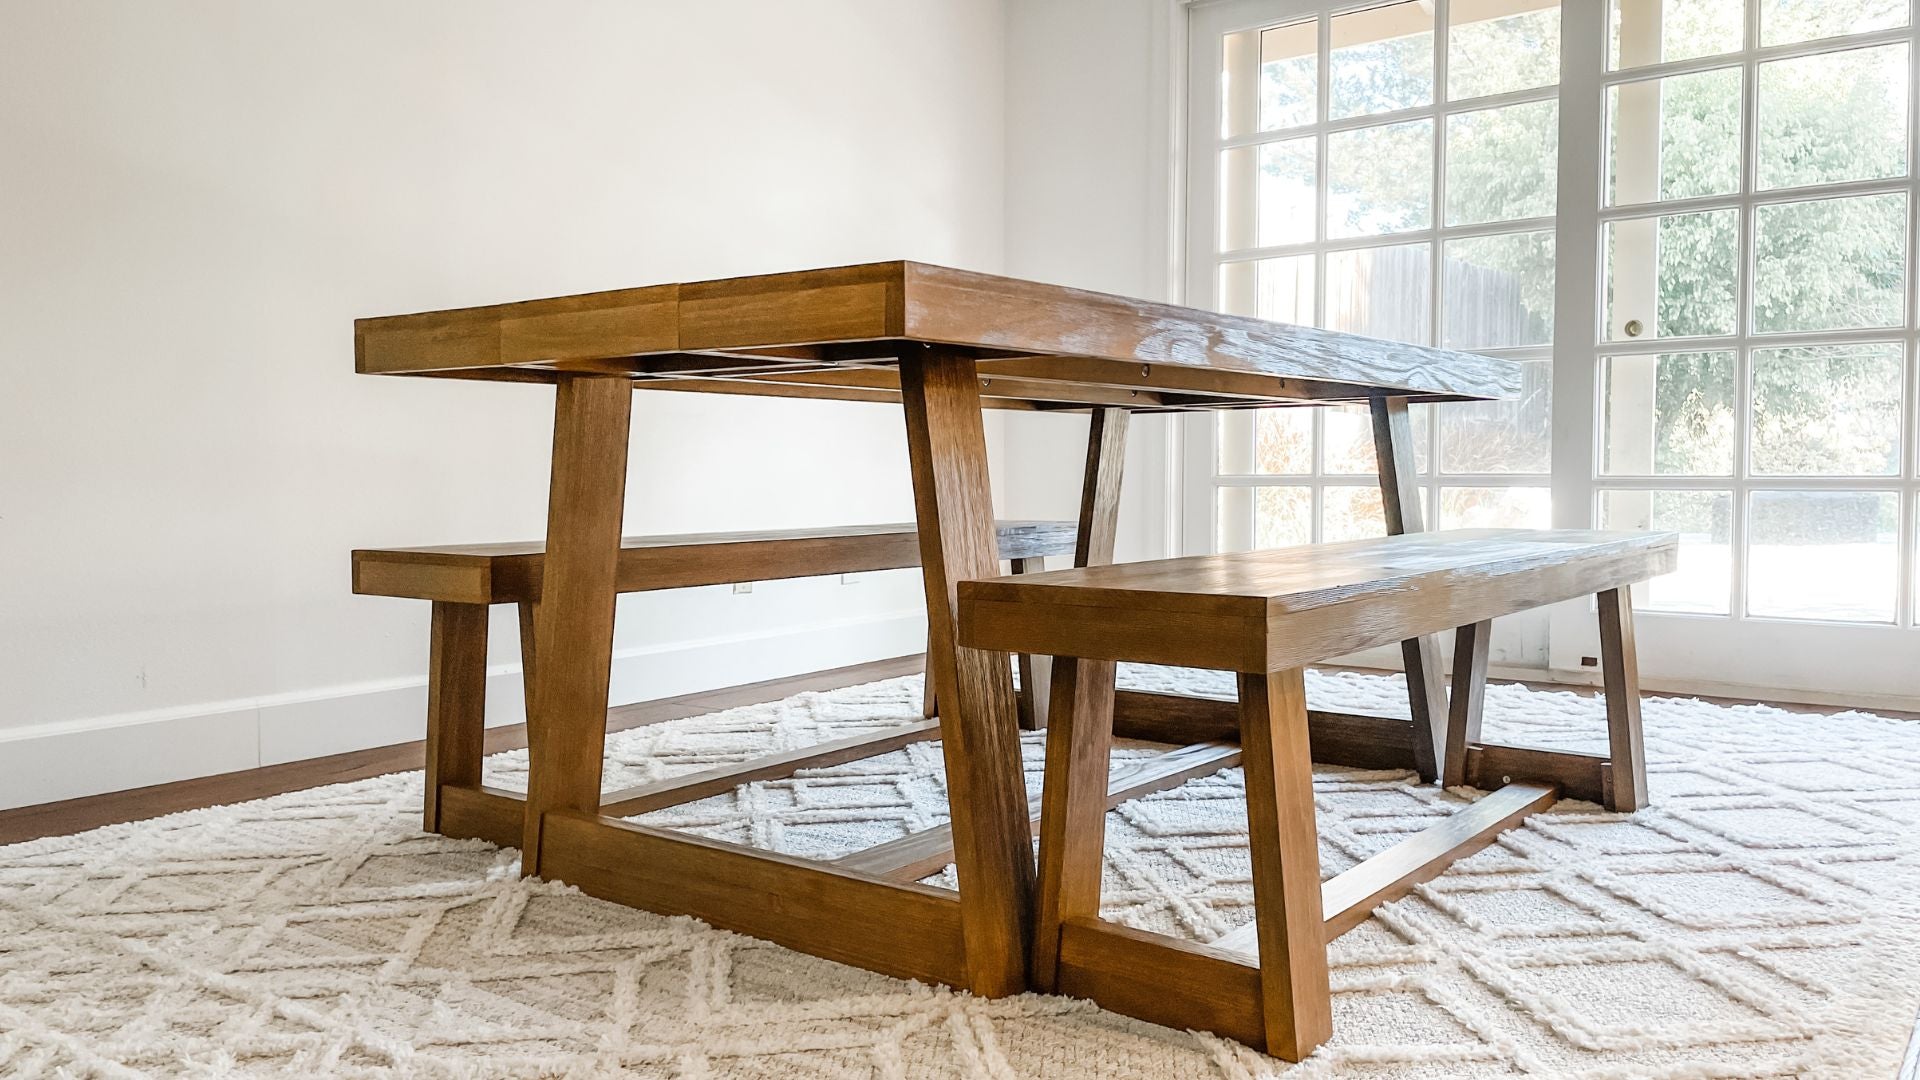 Solid wood dining table set in pecan with two dining benches in pecan and woven rug